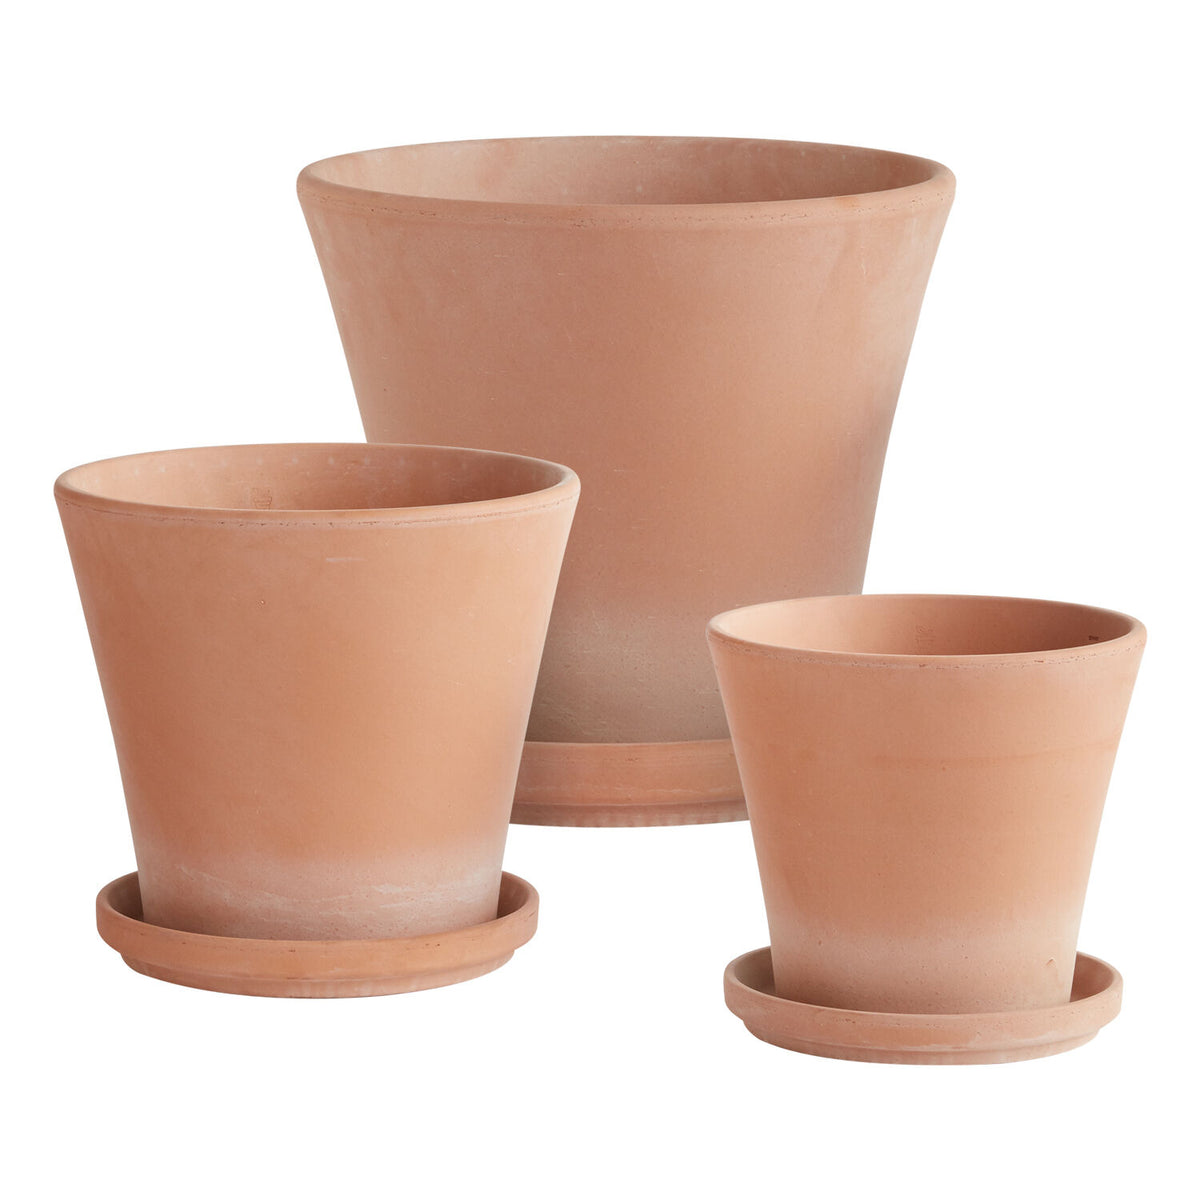 Everly Terracotta Pot With Saucer - Large - Holistic Habitat 